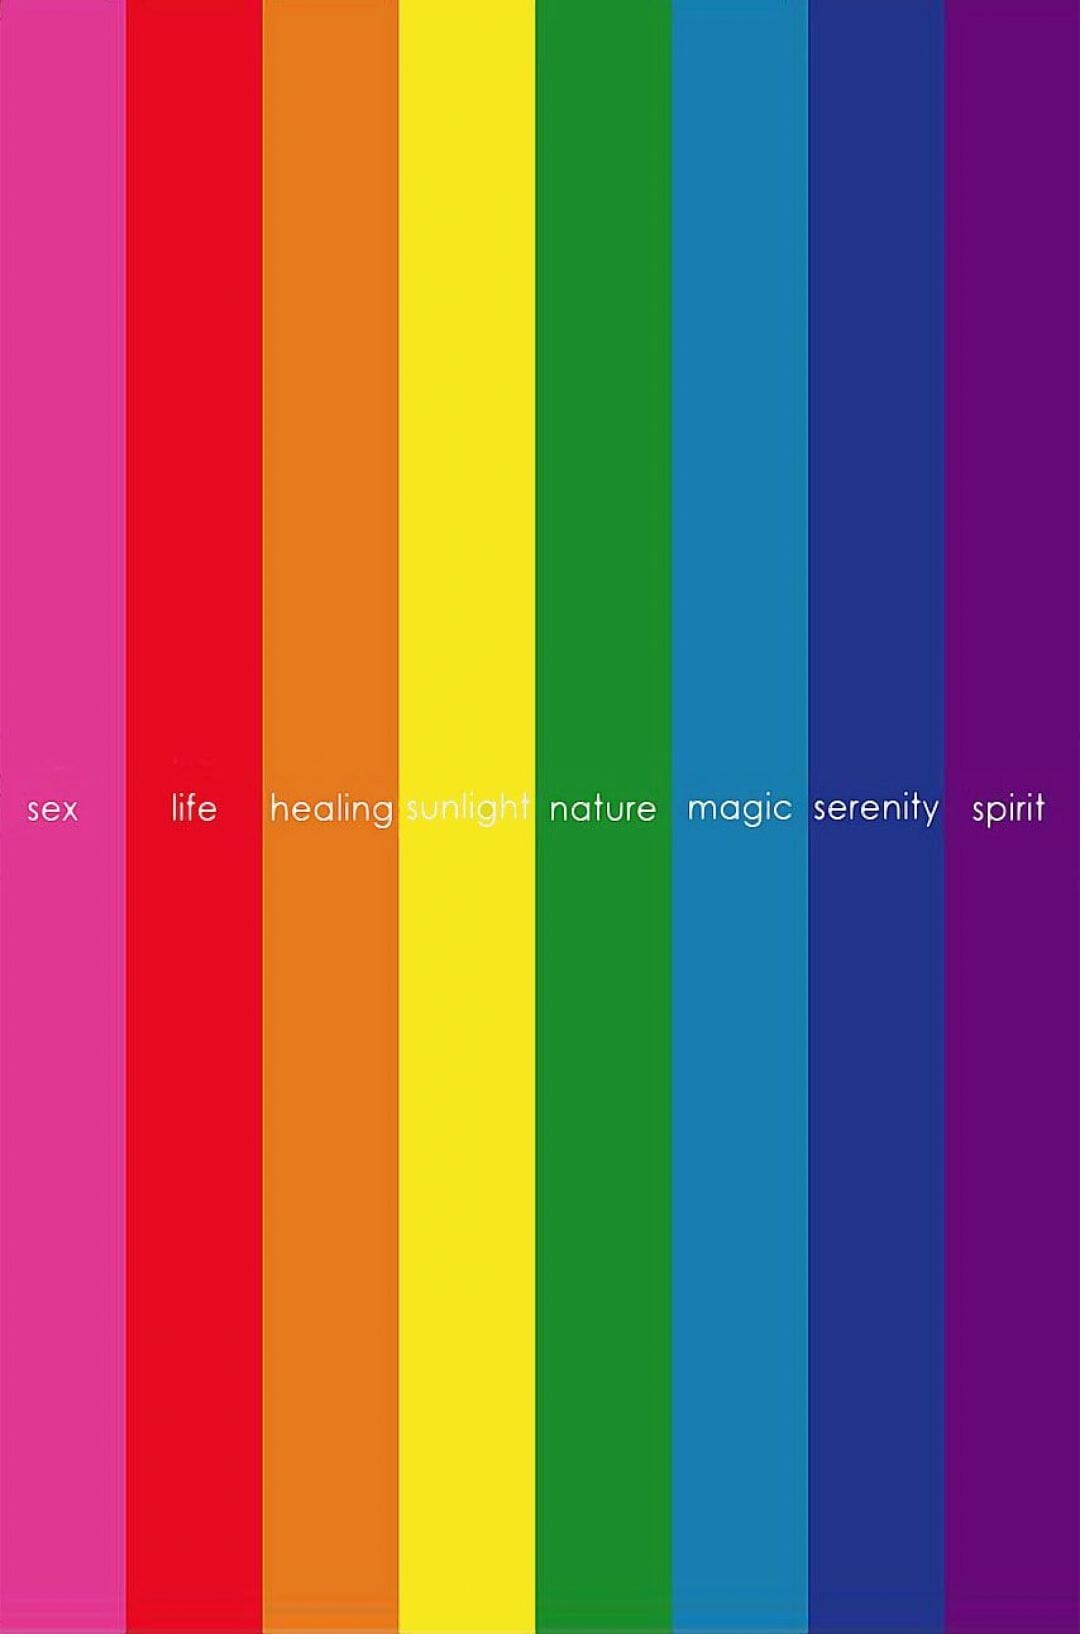 Rainbow wallpaper with the words sex, life, healing, sunlight, nature, magic, serenity, and spirit. - Pride, pansexual, LGBT